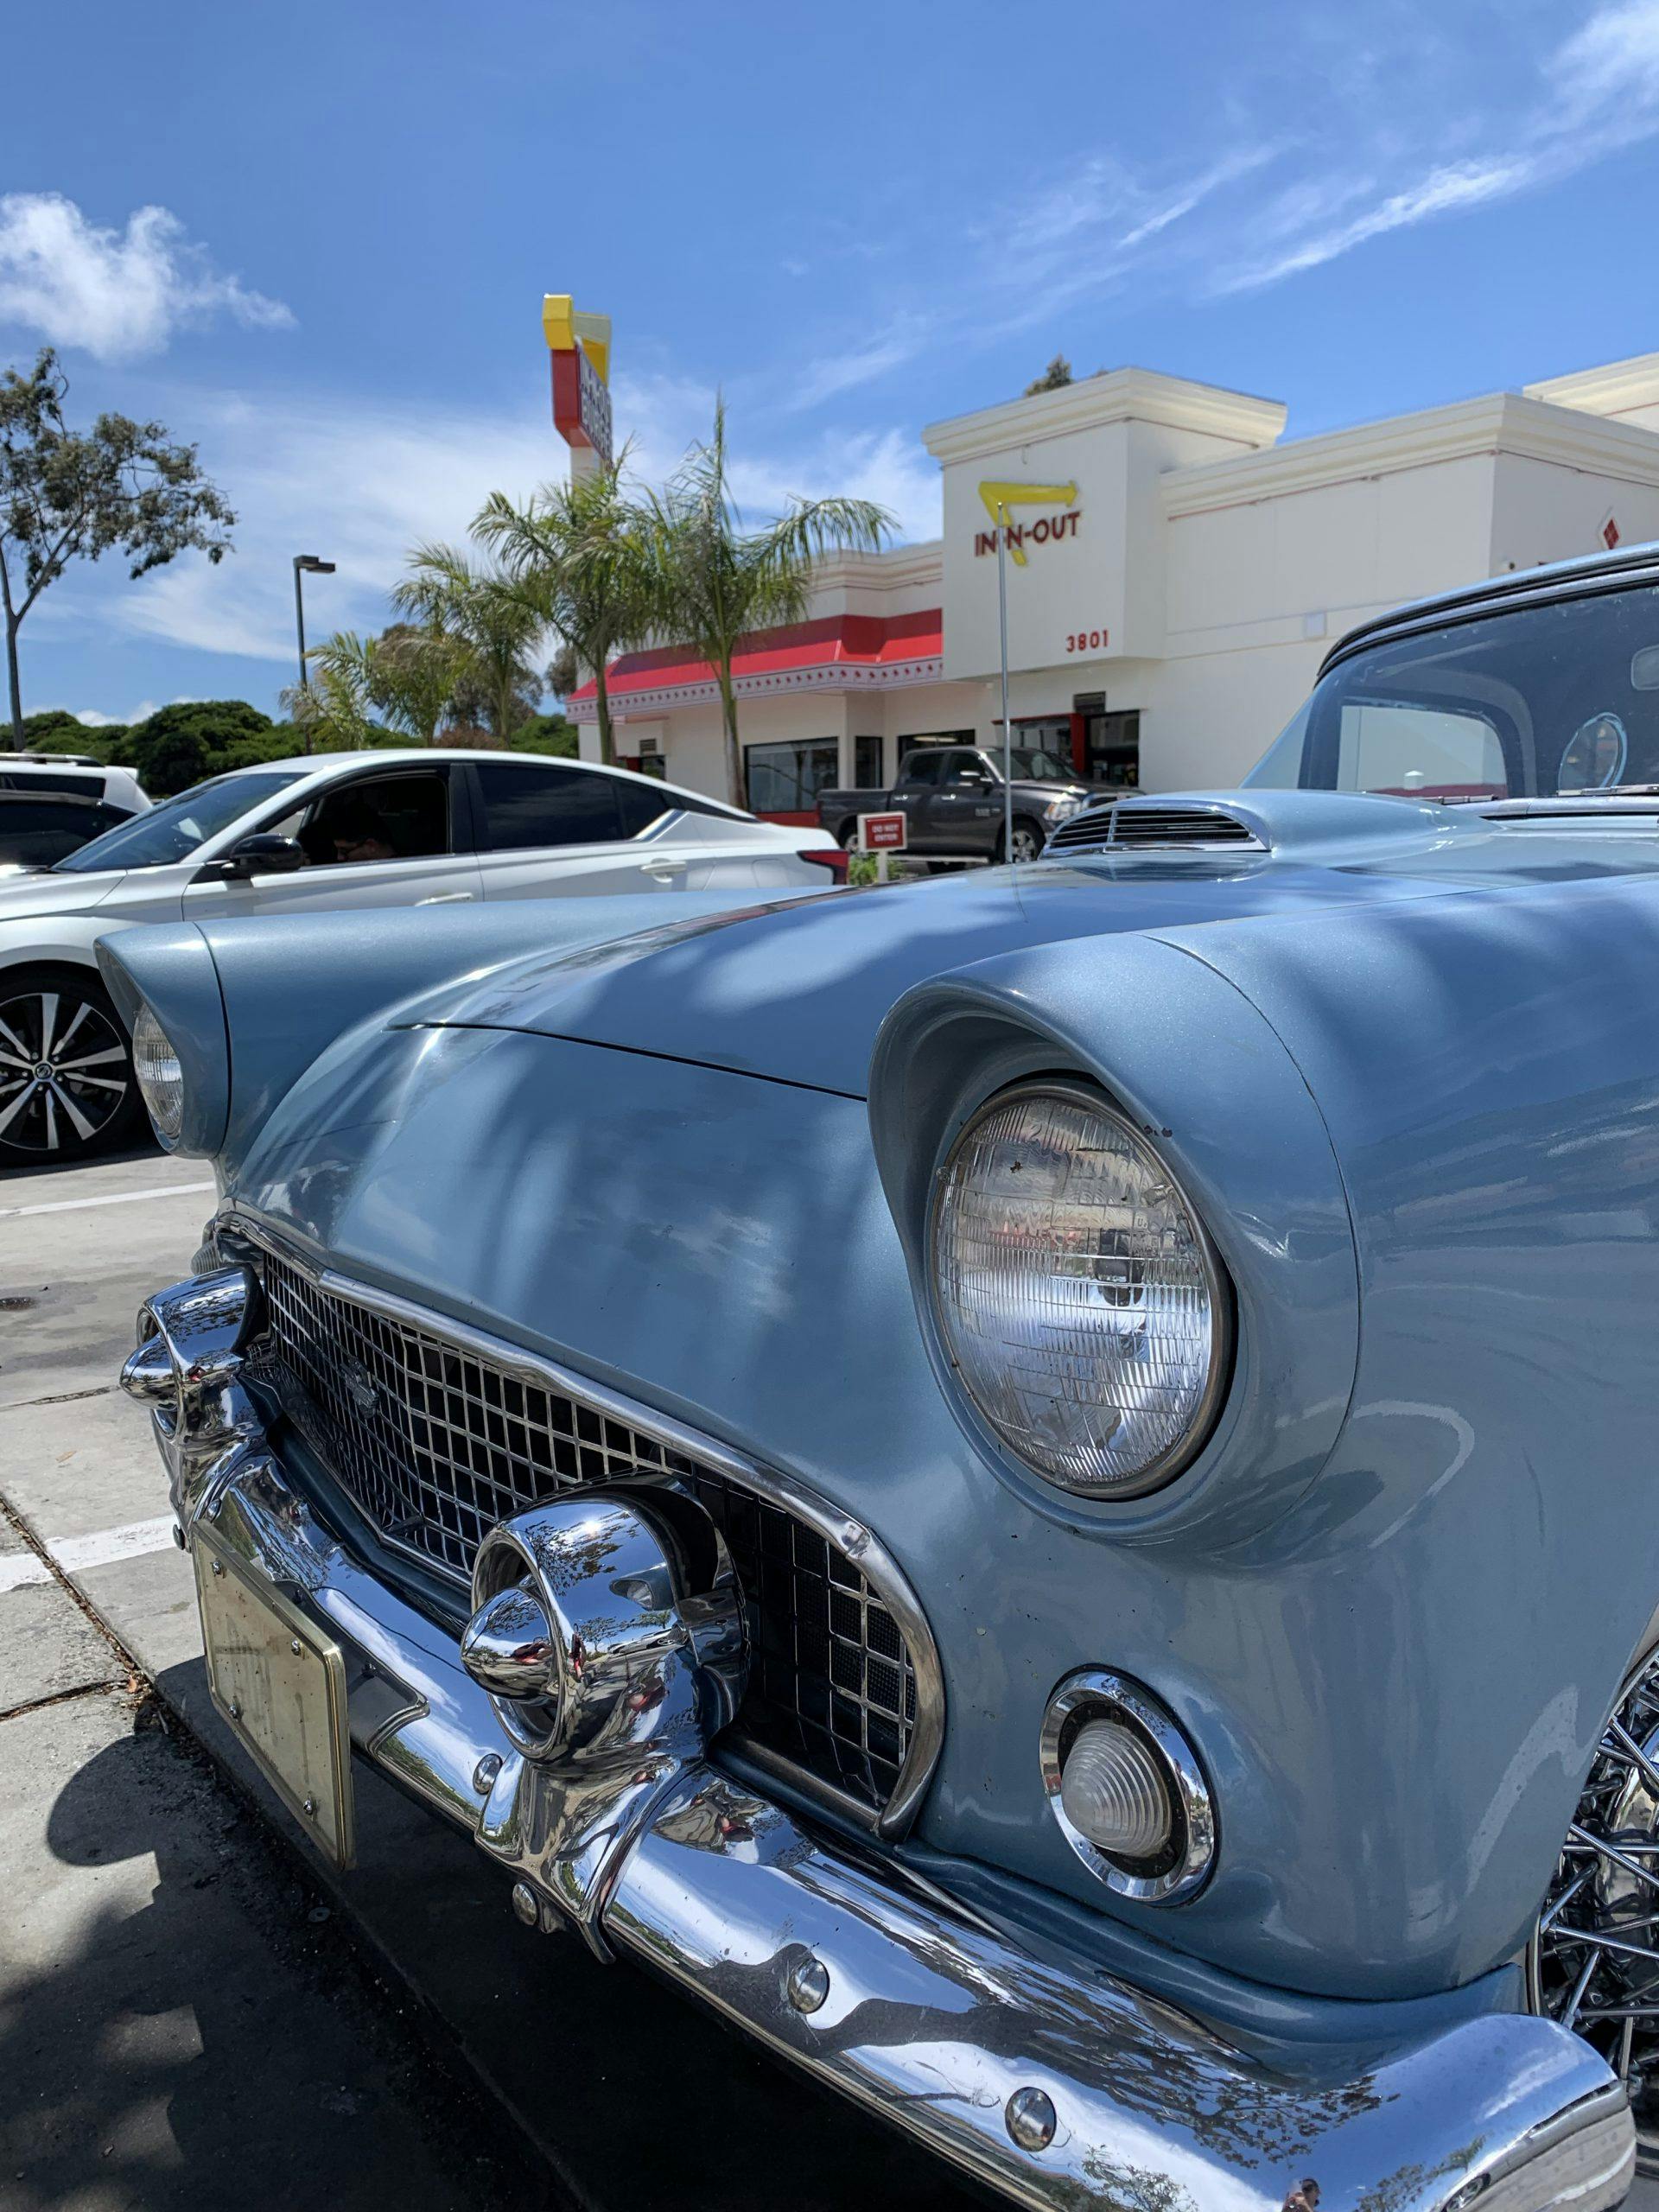 1956 Ford Thunderbird At In N Out Burger